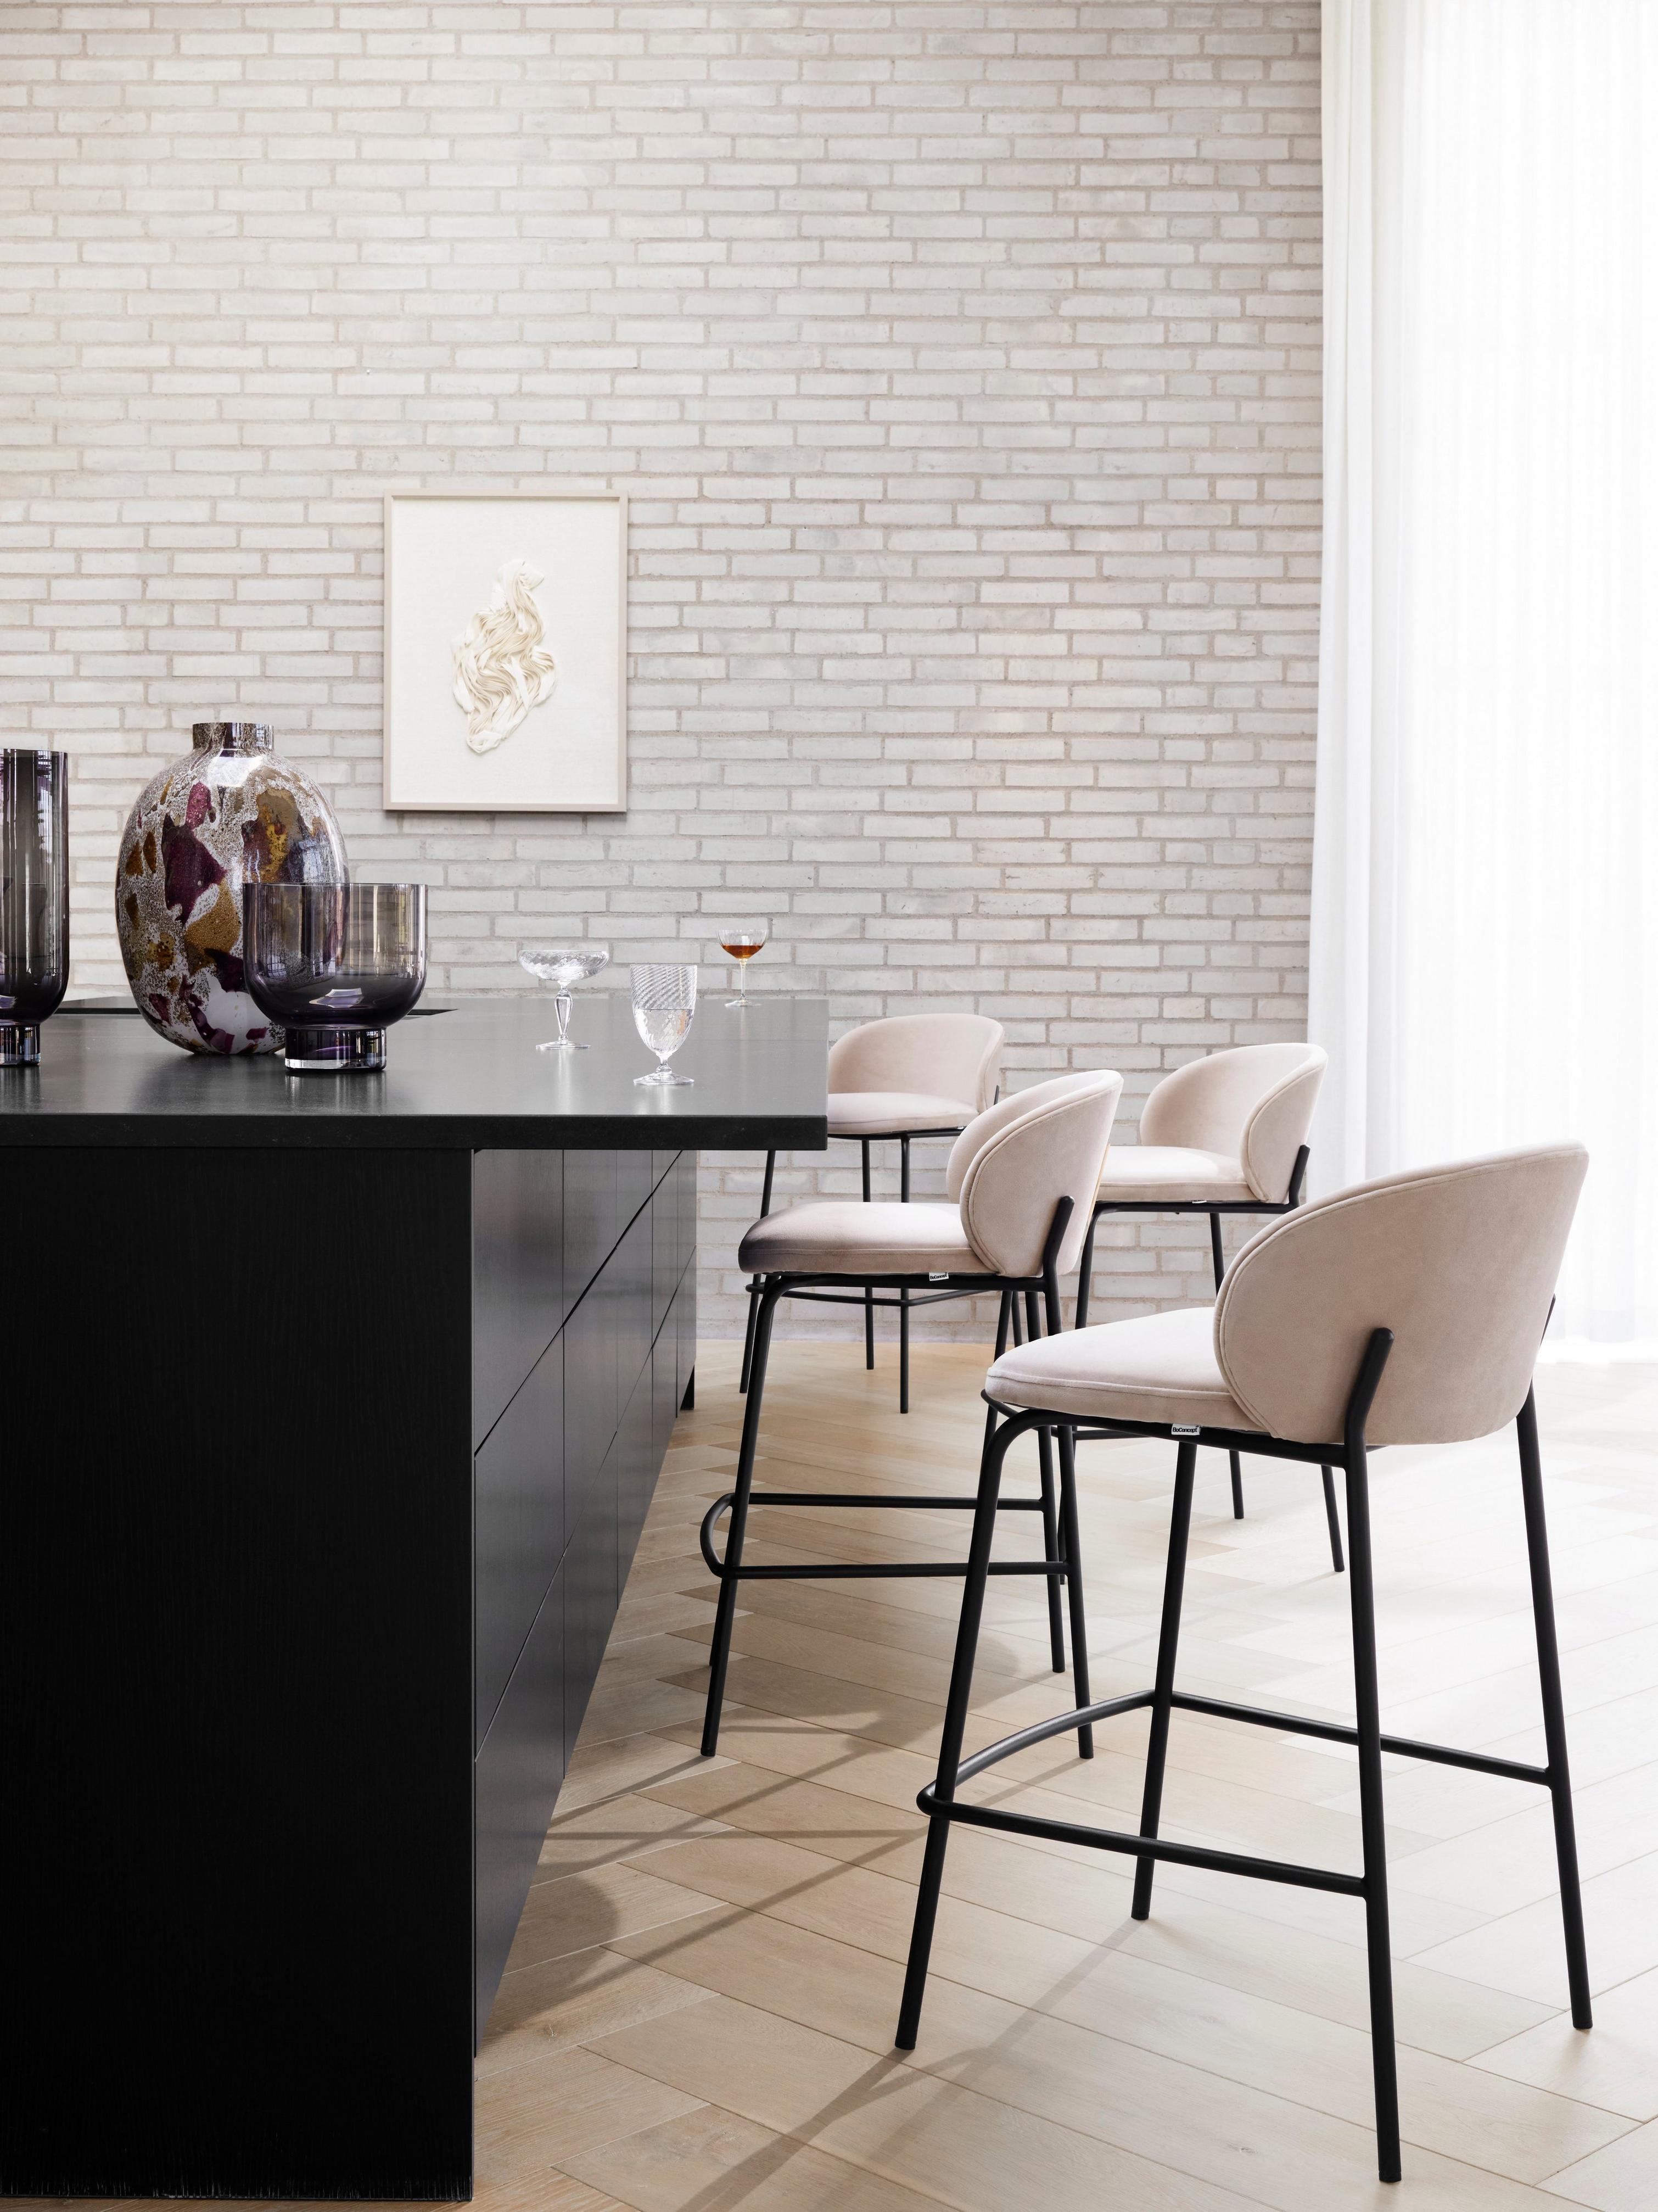 Modern kitchen bar with black countertop, beige high chairs, and decorative vases against a white brick wall.